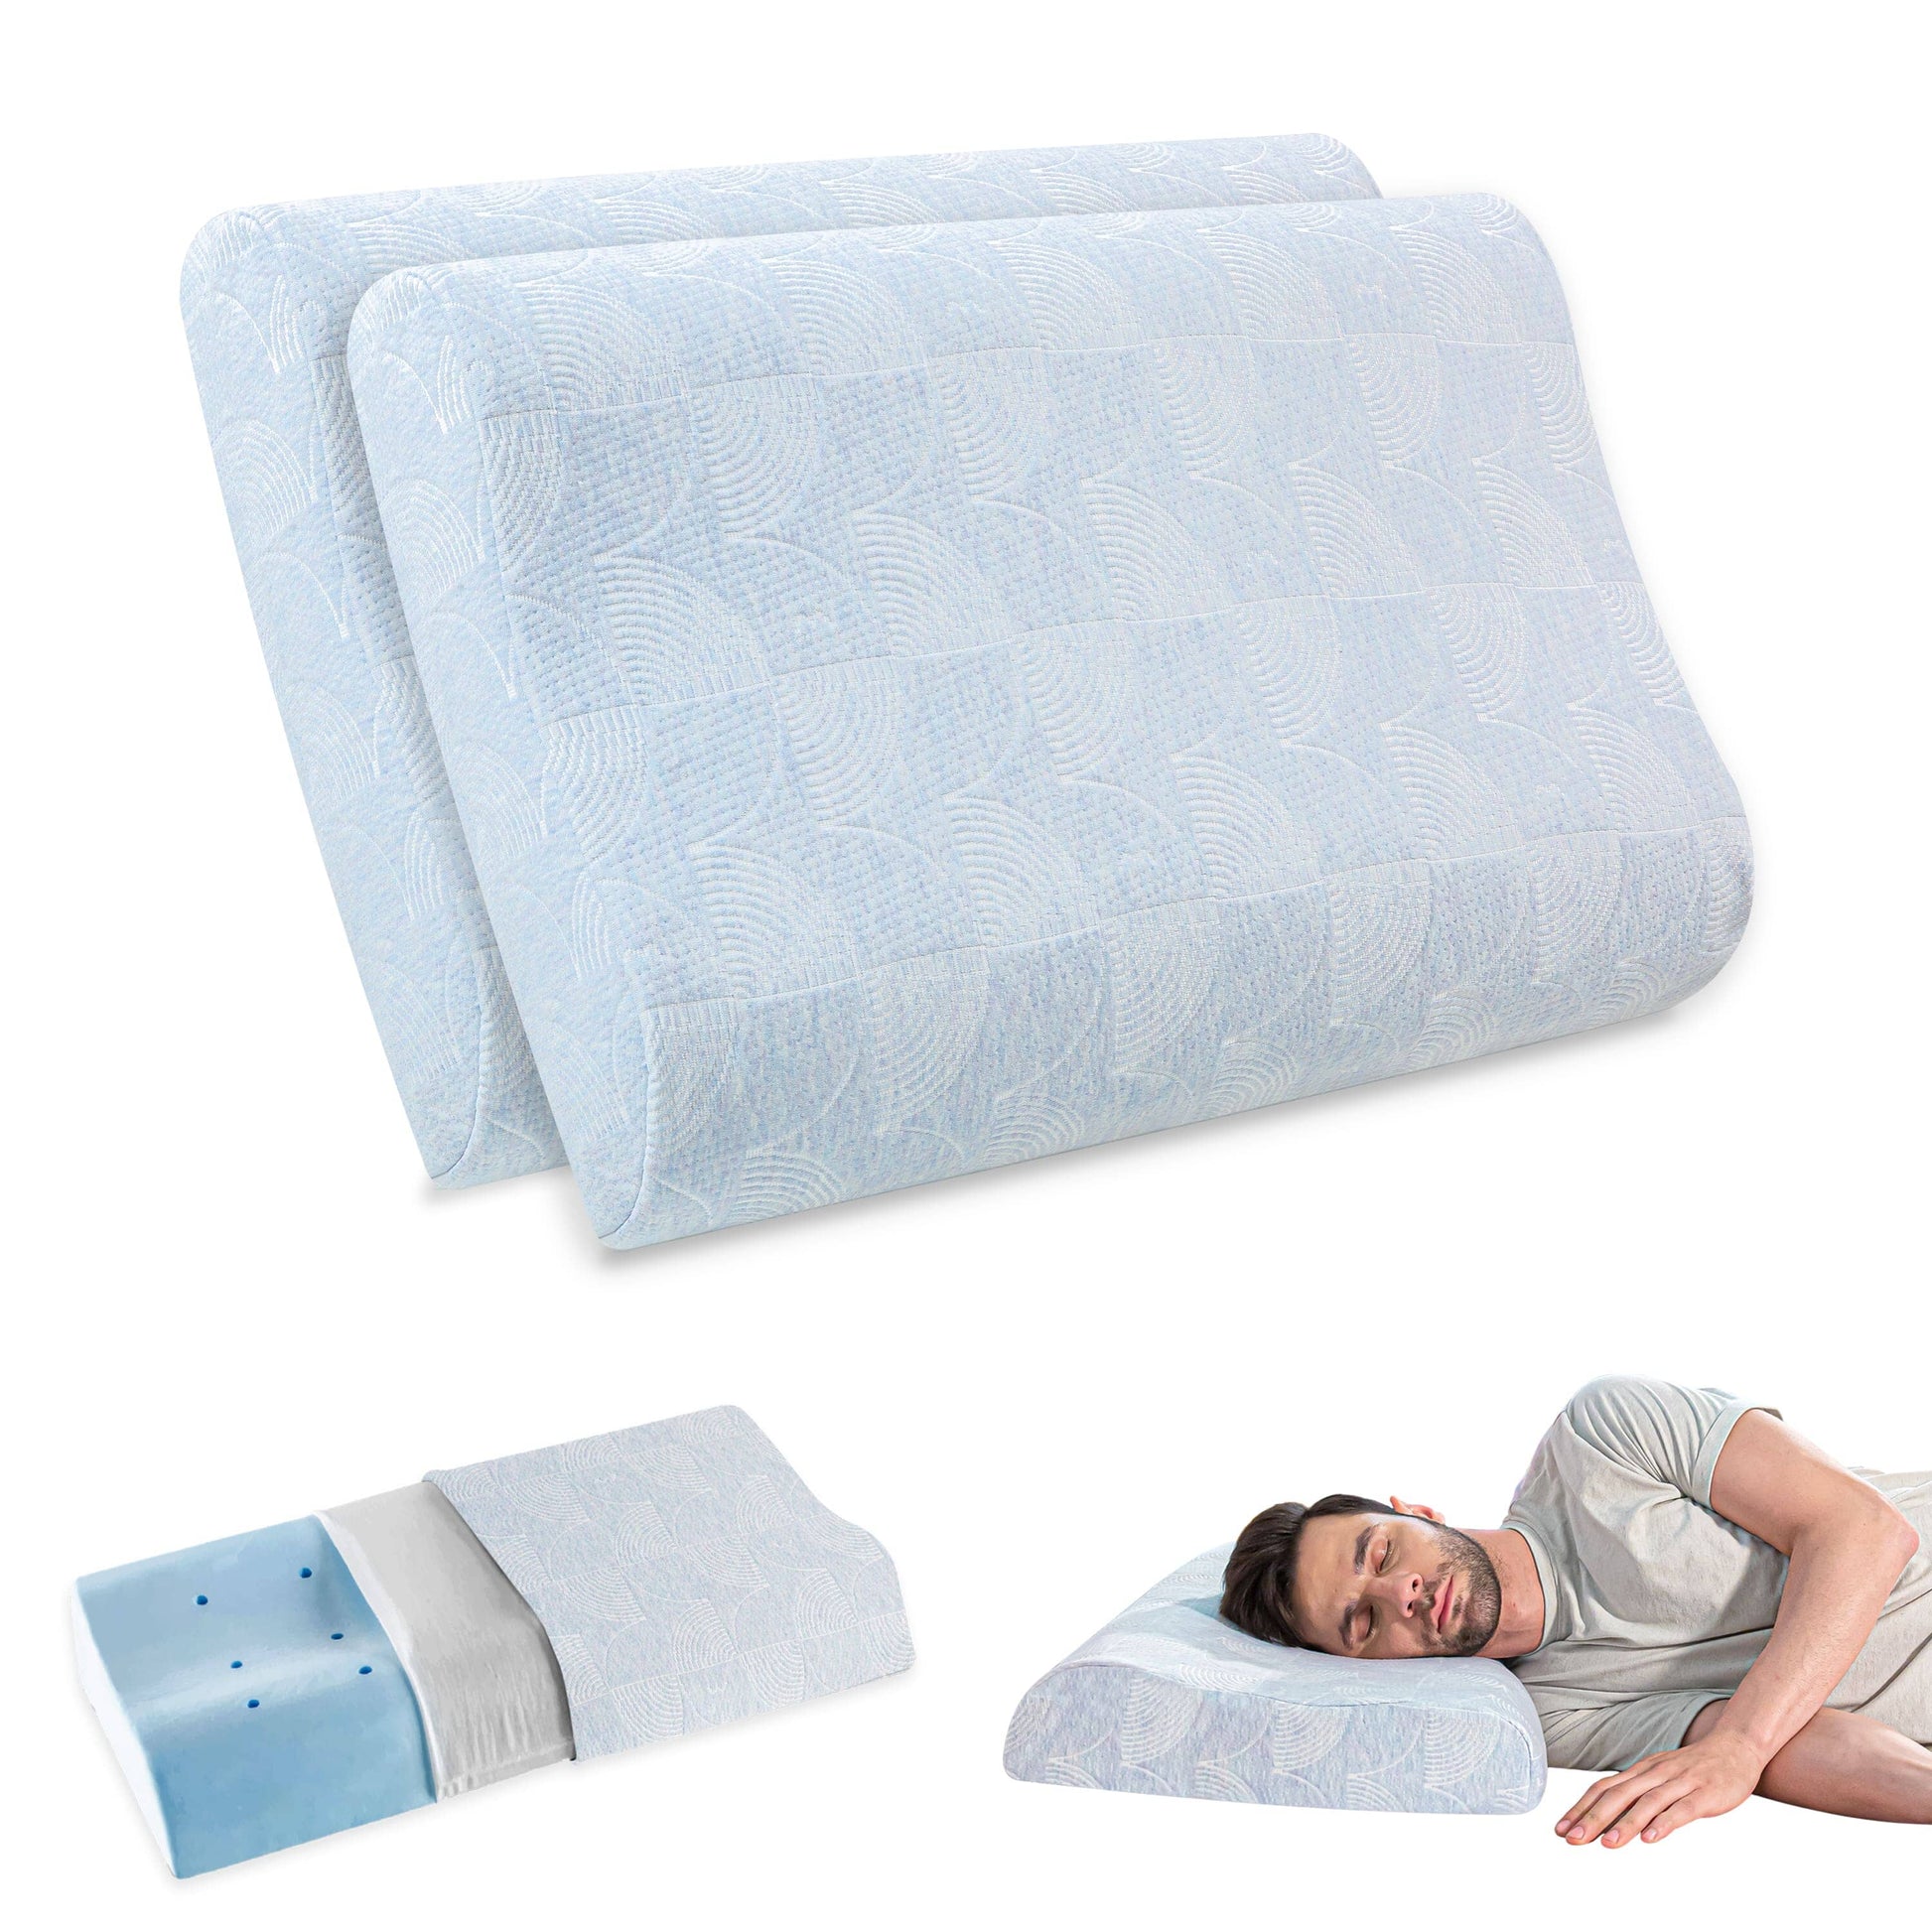 Aloe - Cooling Gel Memory Foam Cervical Pillow - Contour - Medium Firm Contour Pillow The White Willow X-Small Green 2